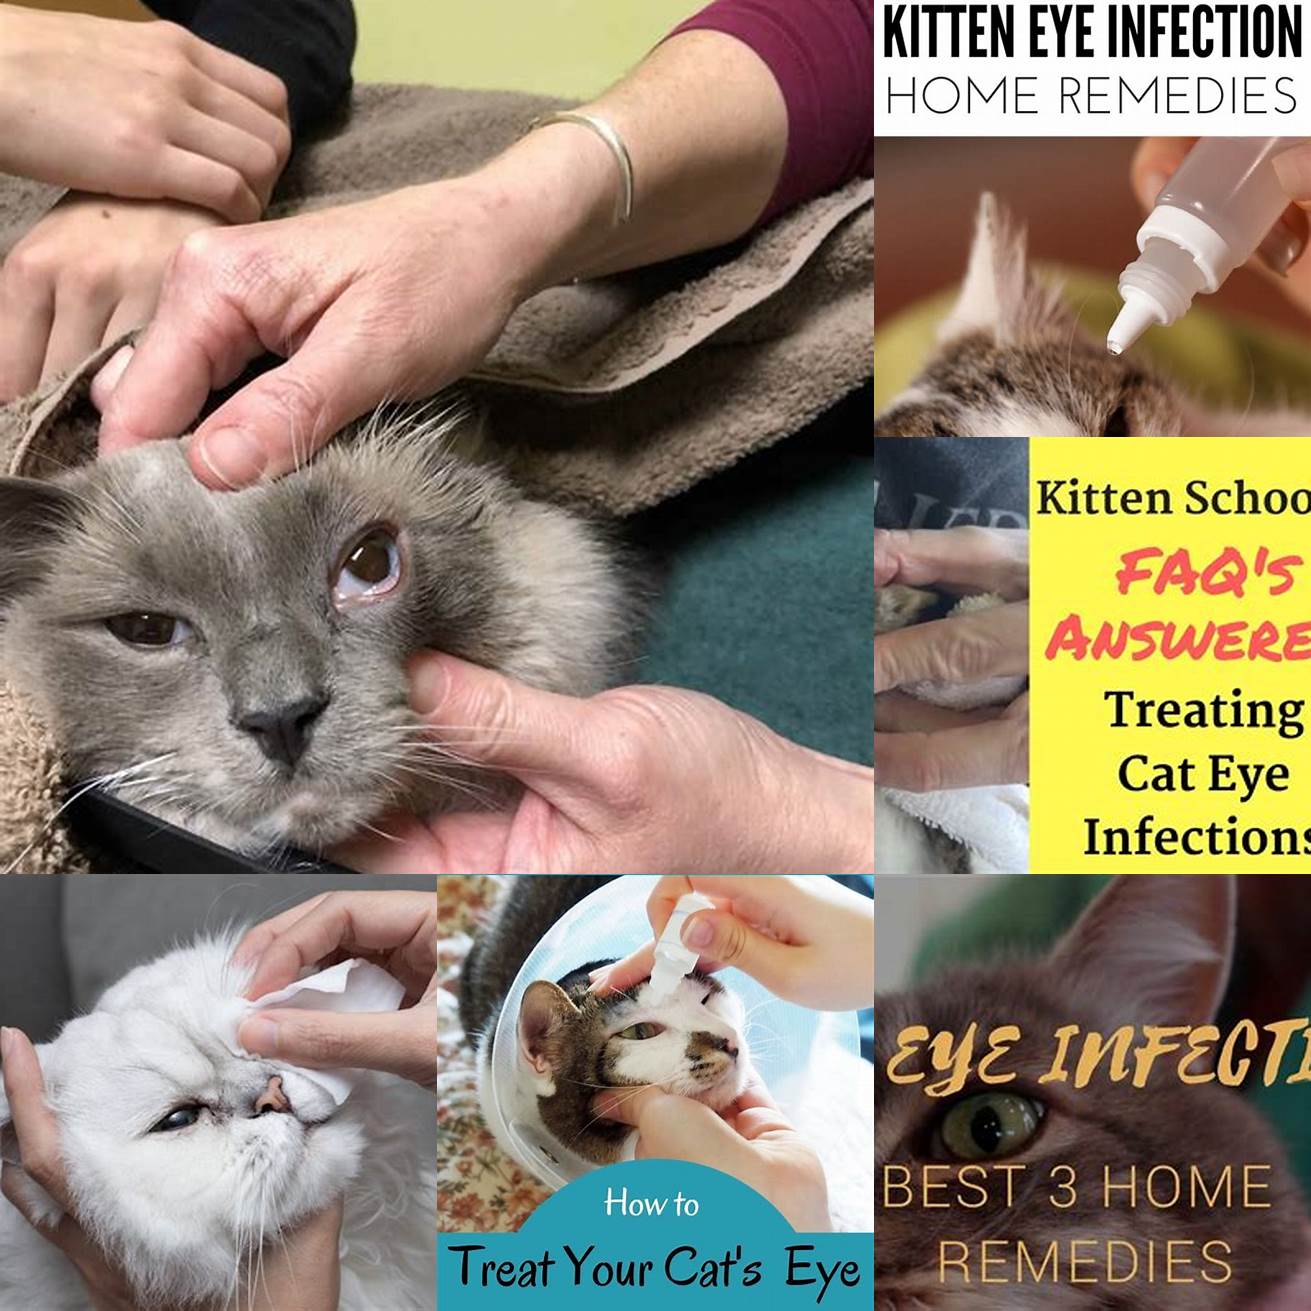 Gently wipe your cats infected eye with the mixture